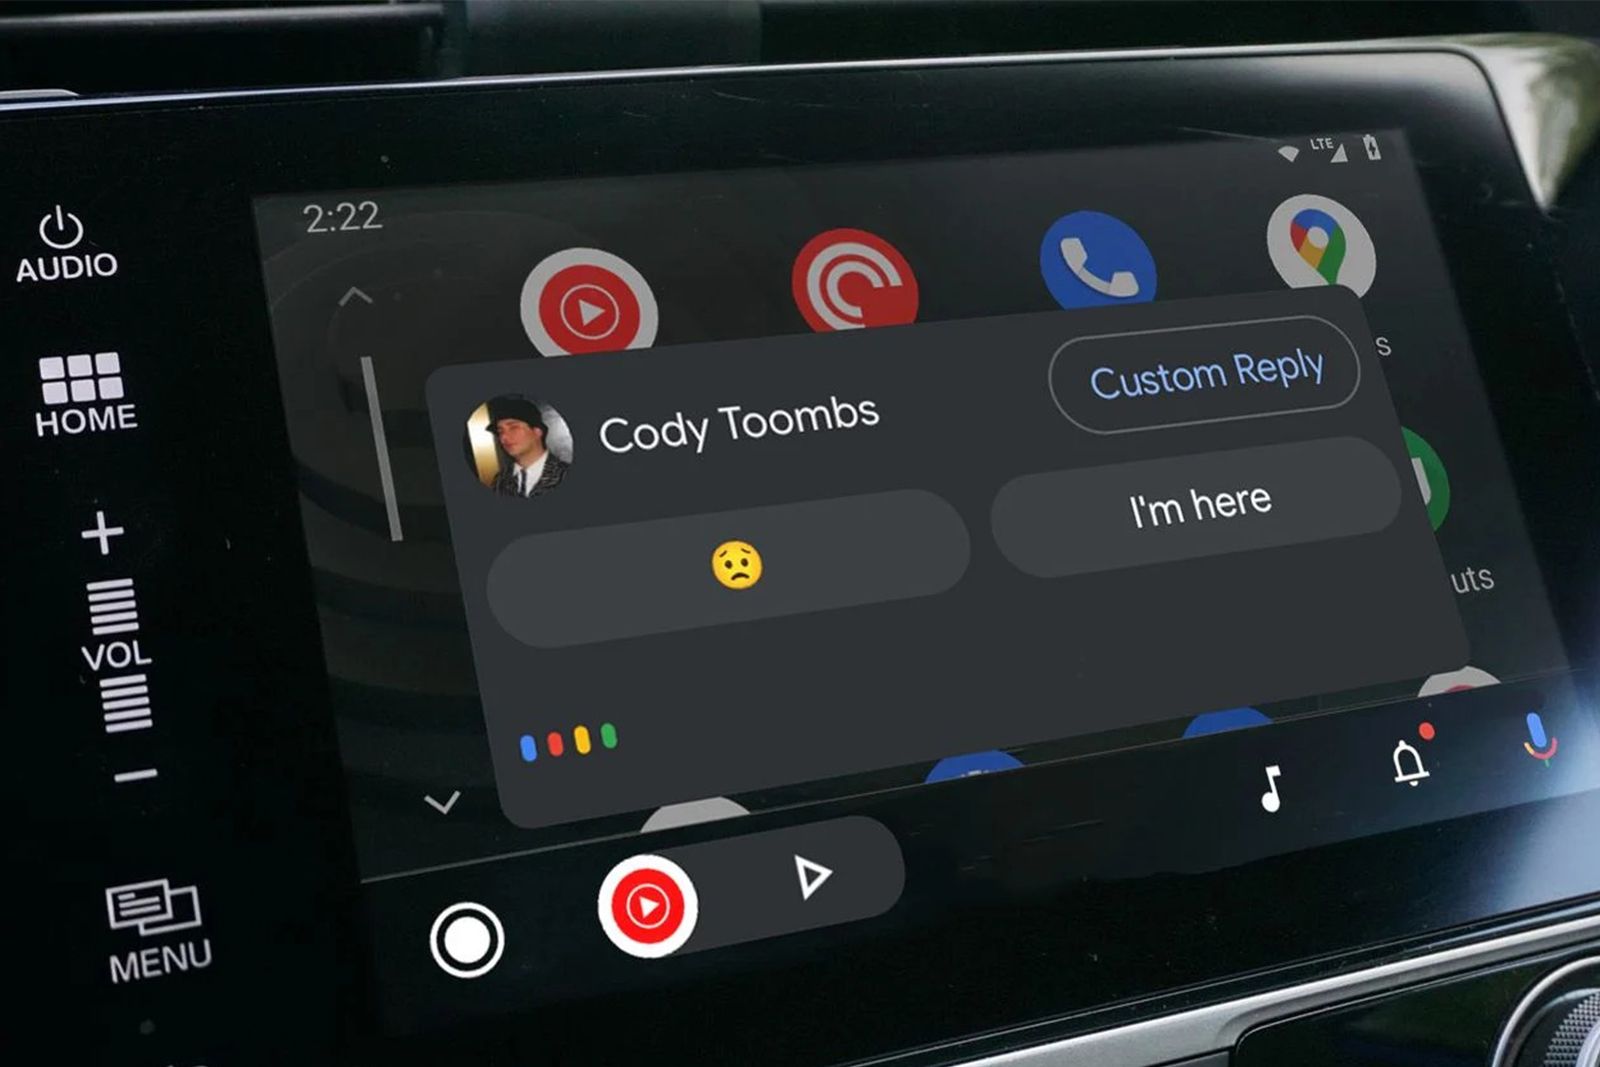 Smart Replies finally arrive on Android Auto photo 1